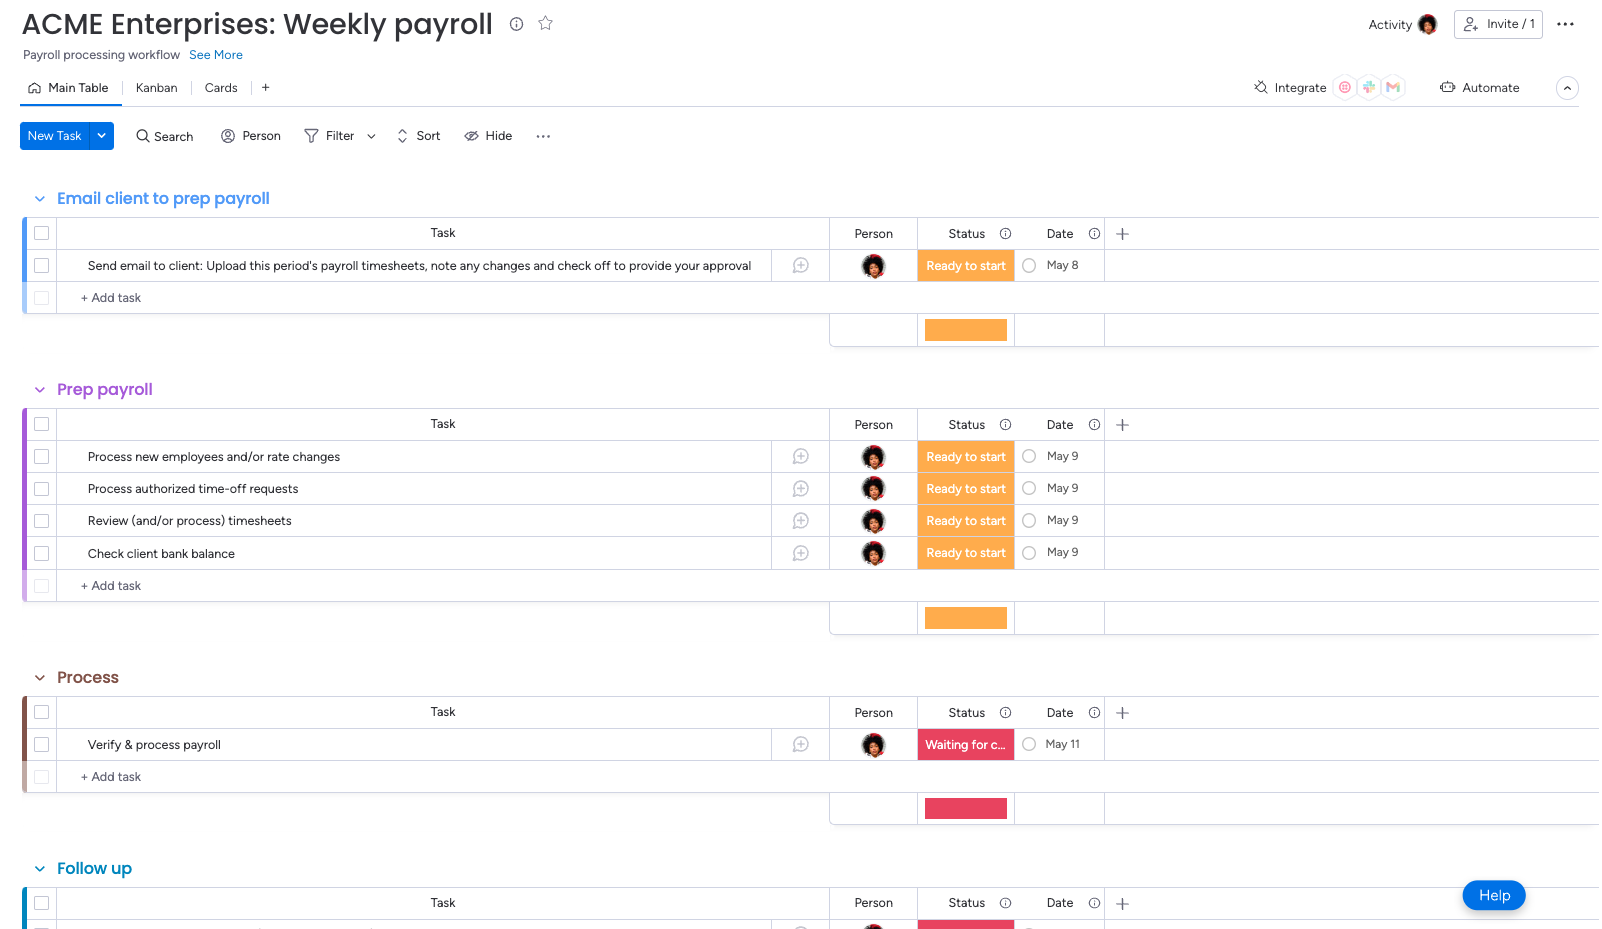 A mock up of a payroll processing workflow in Monday.com. The workflow is in a table format, using assignees, color-coordinated statuses, and due dates.